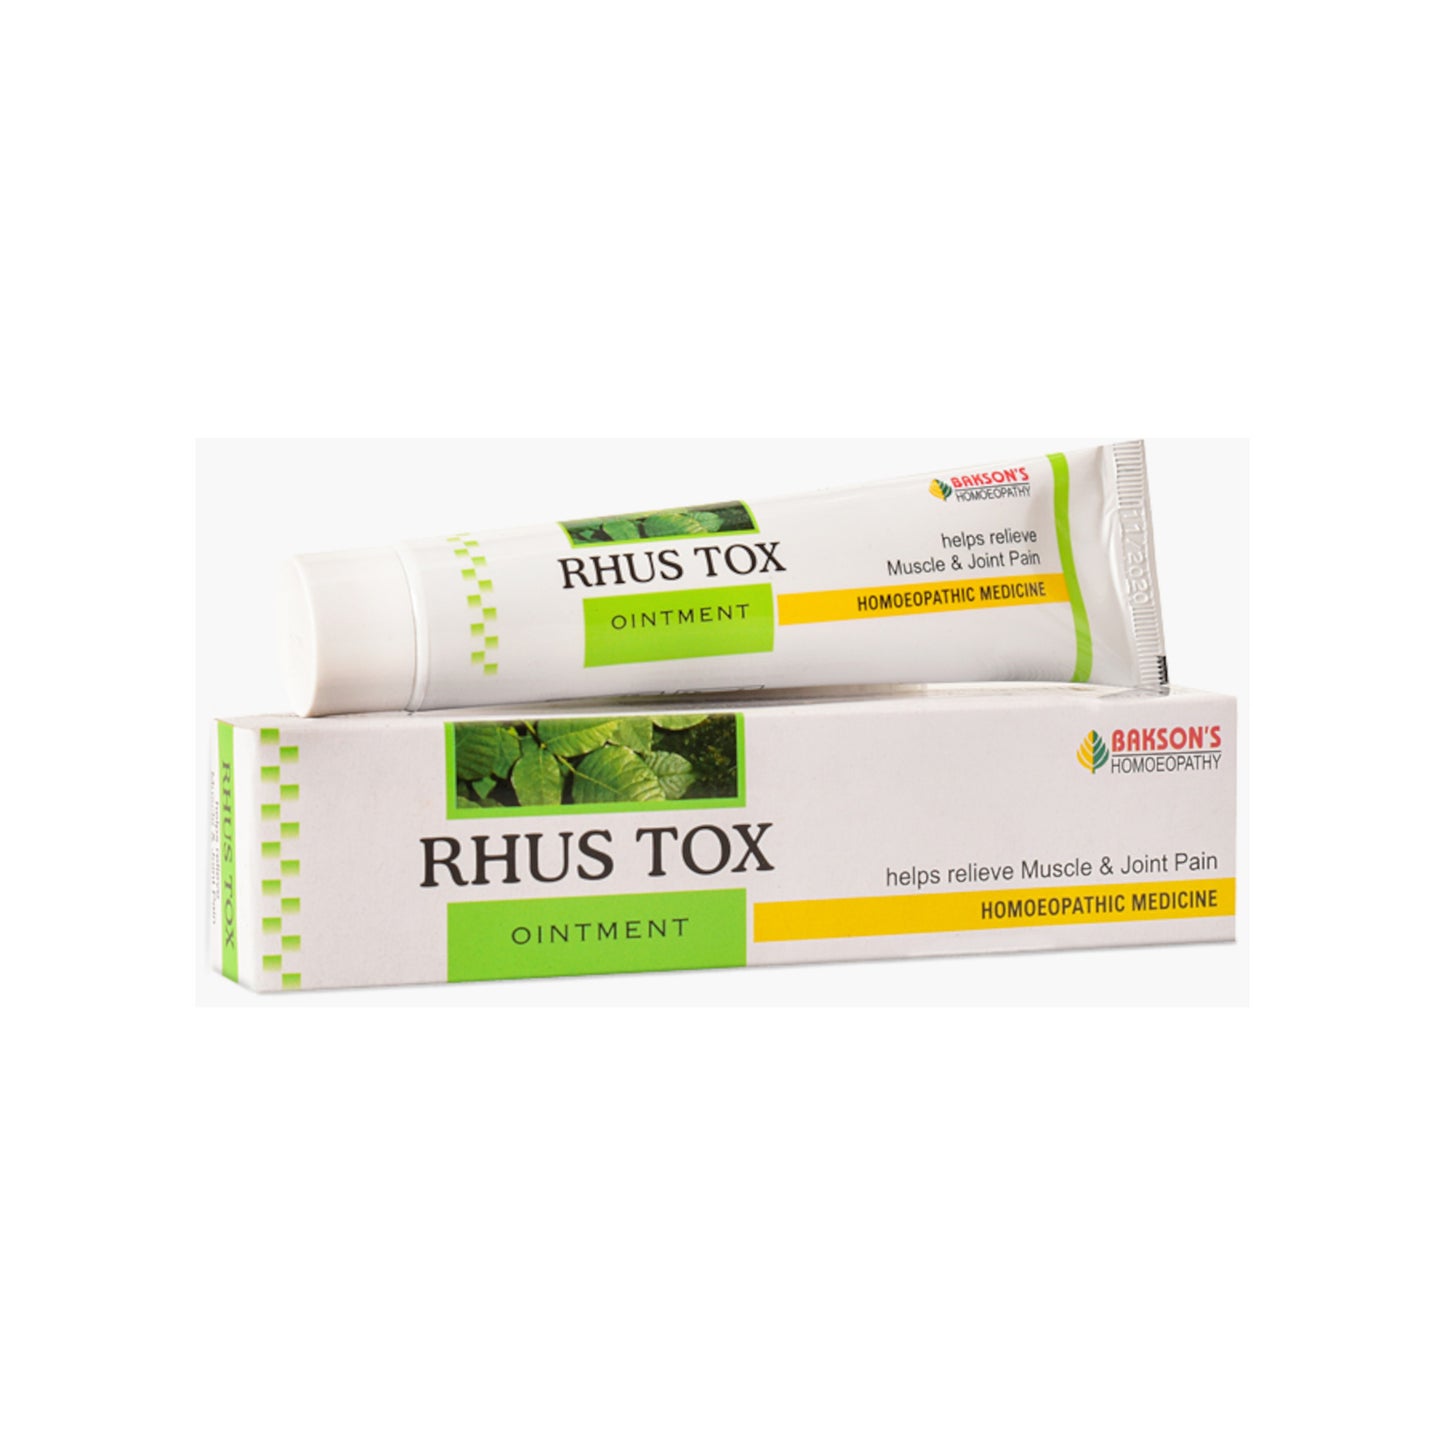 Bakson's Homeopathy - Rhus Tox Ointment 25 g